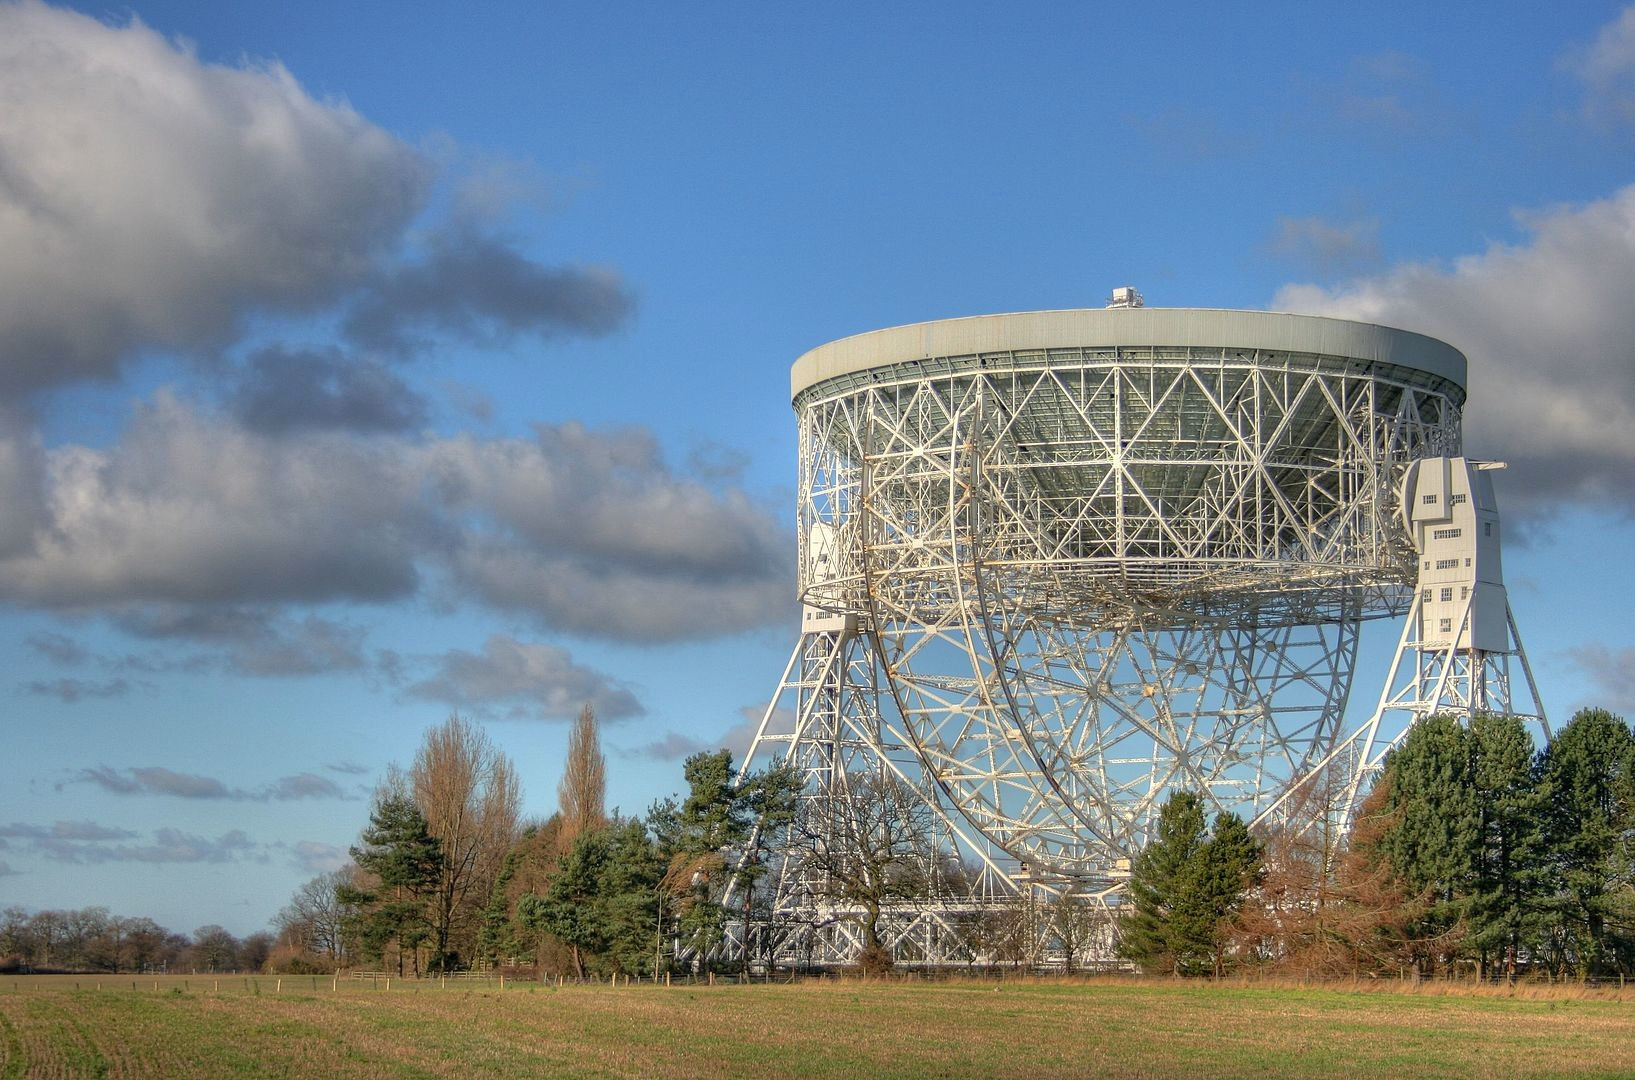 By Mike Peel; Jodrell Bank Centre for Astrophysics, University of Manchester., CC BY-SA 4.0, https://commons.wikimedia.org/w/index.php?curid=2171884